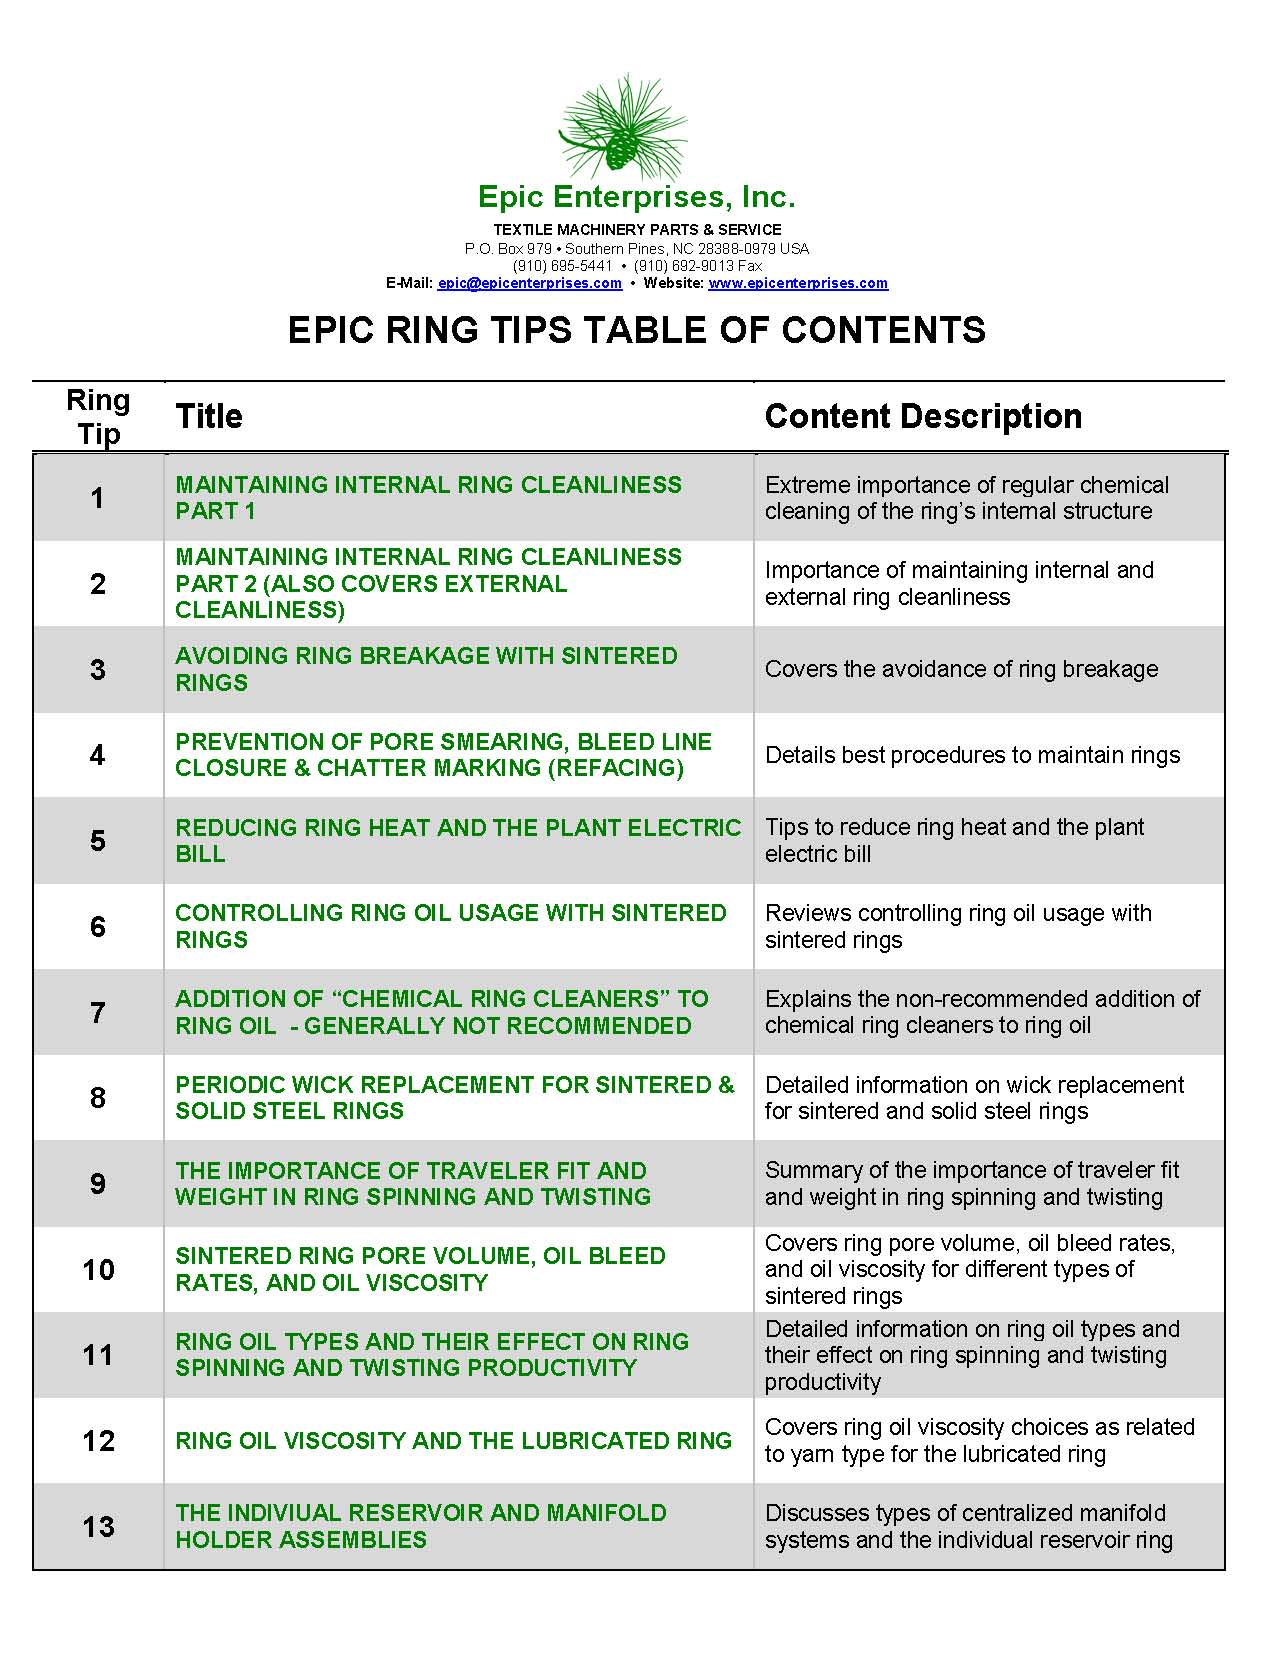 Epic Ring Tips